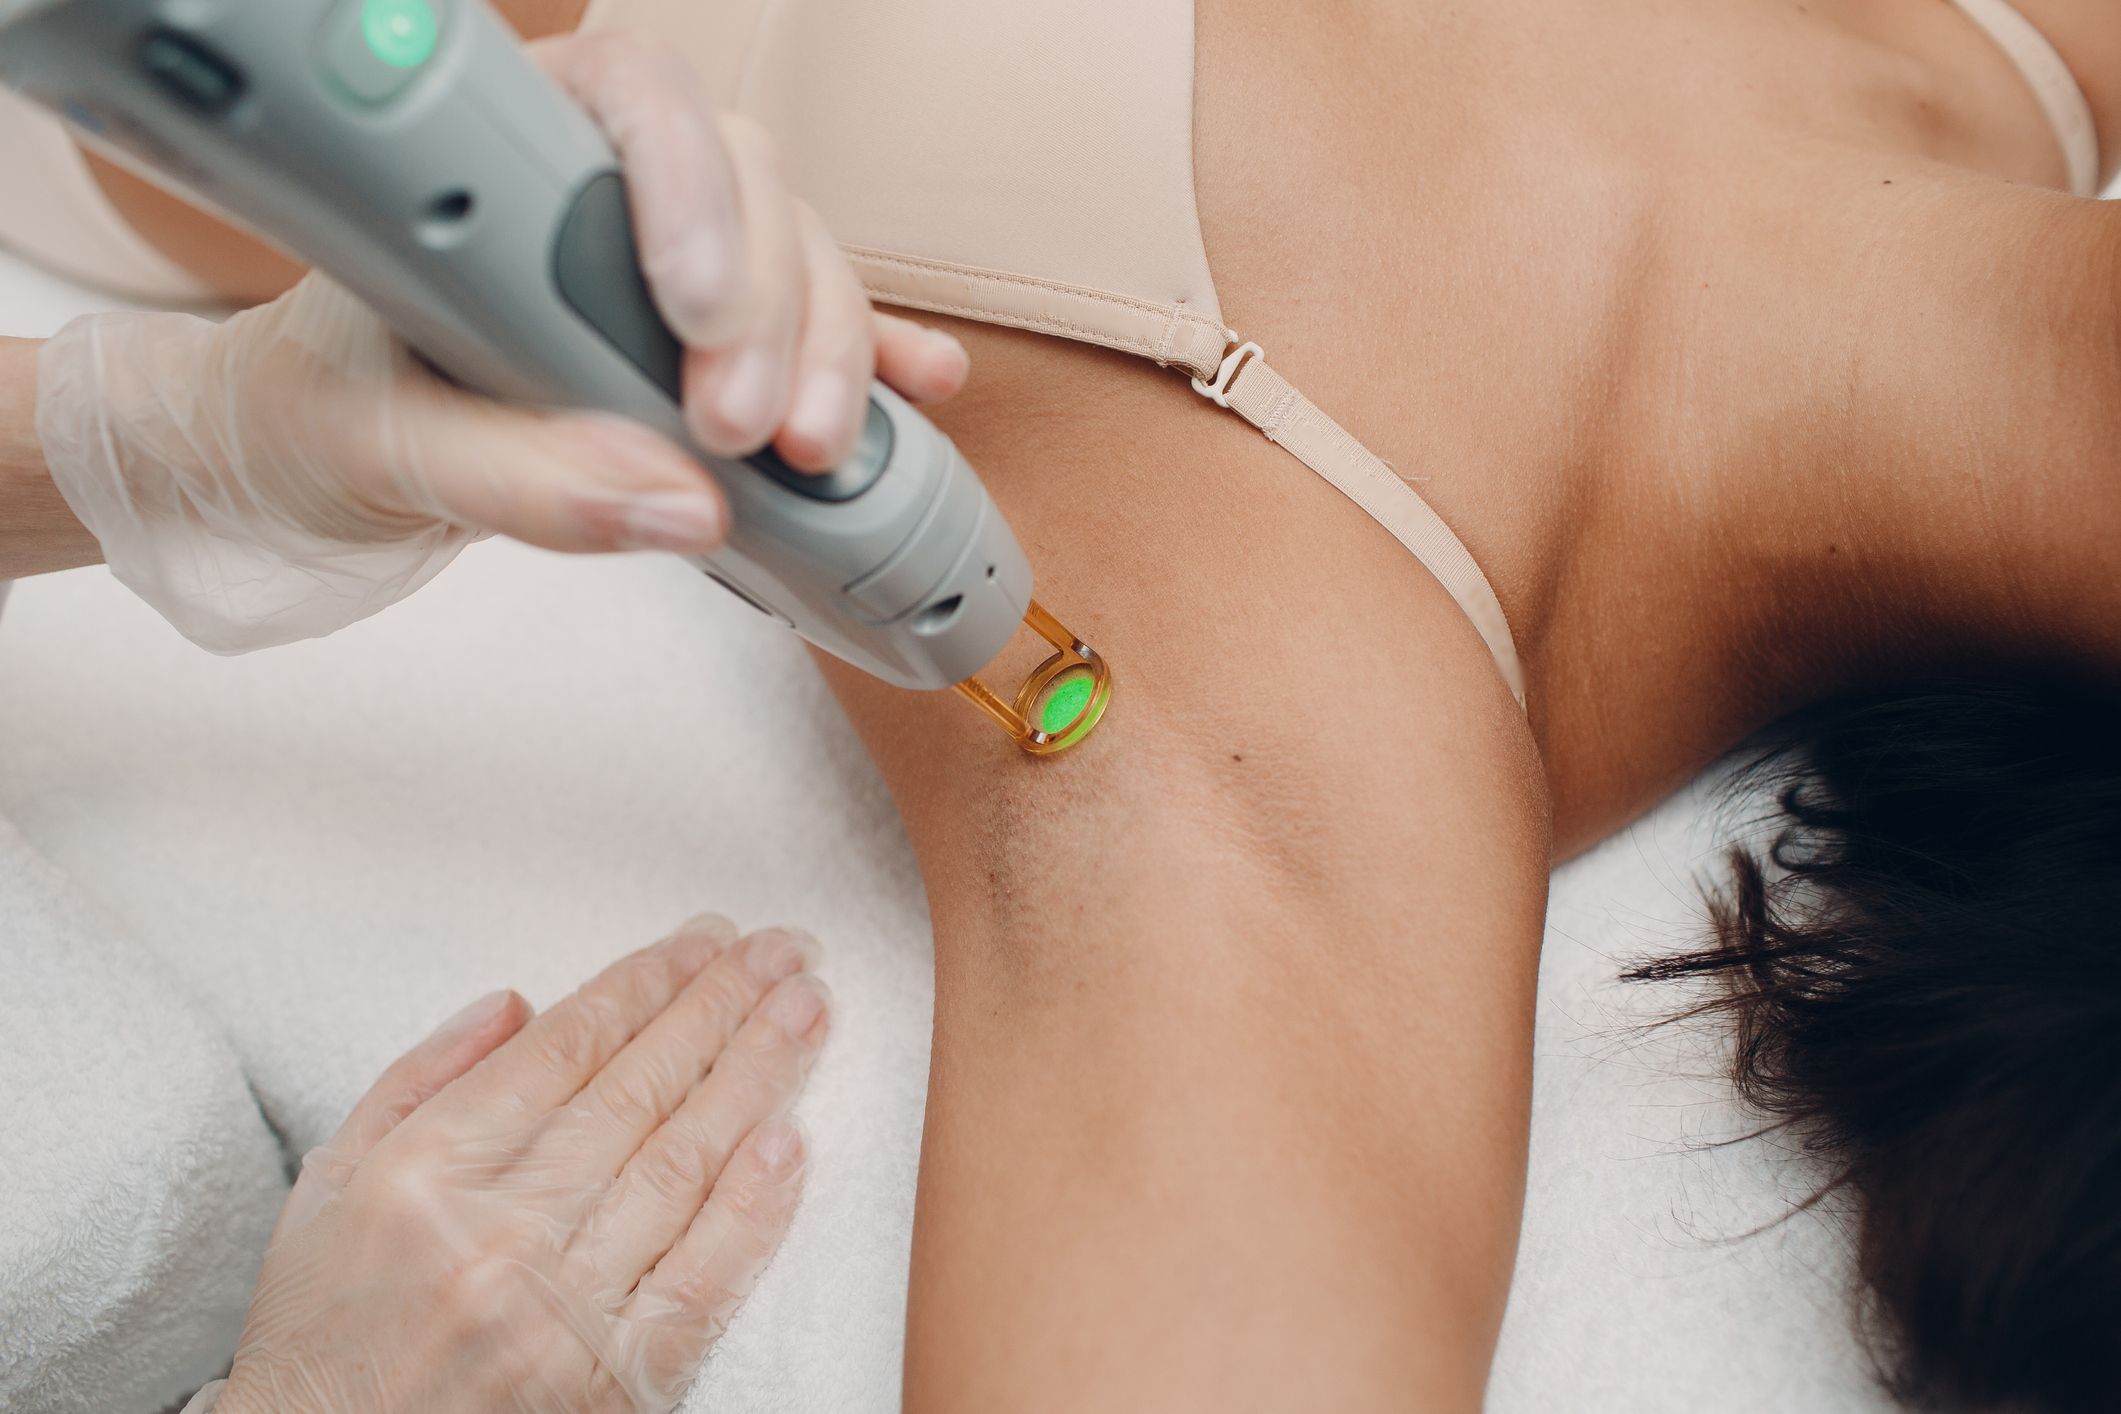 Flawless Skin Awaits: Derby's Laser Hair Removal Experts